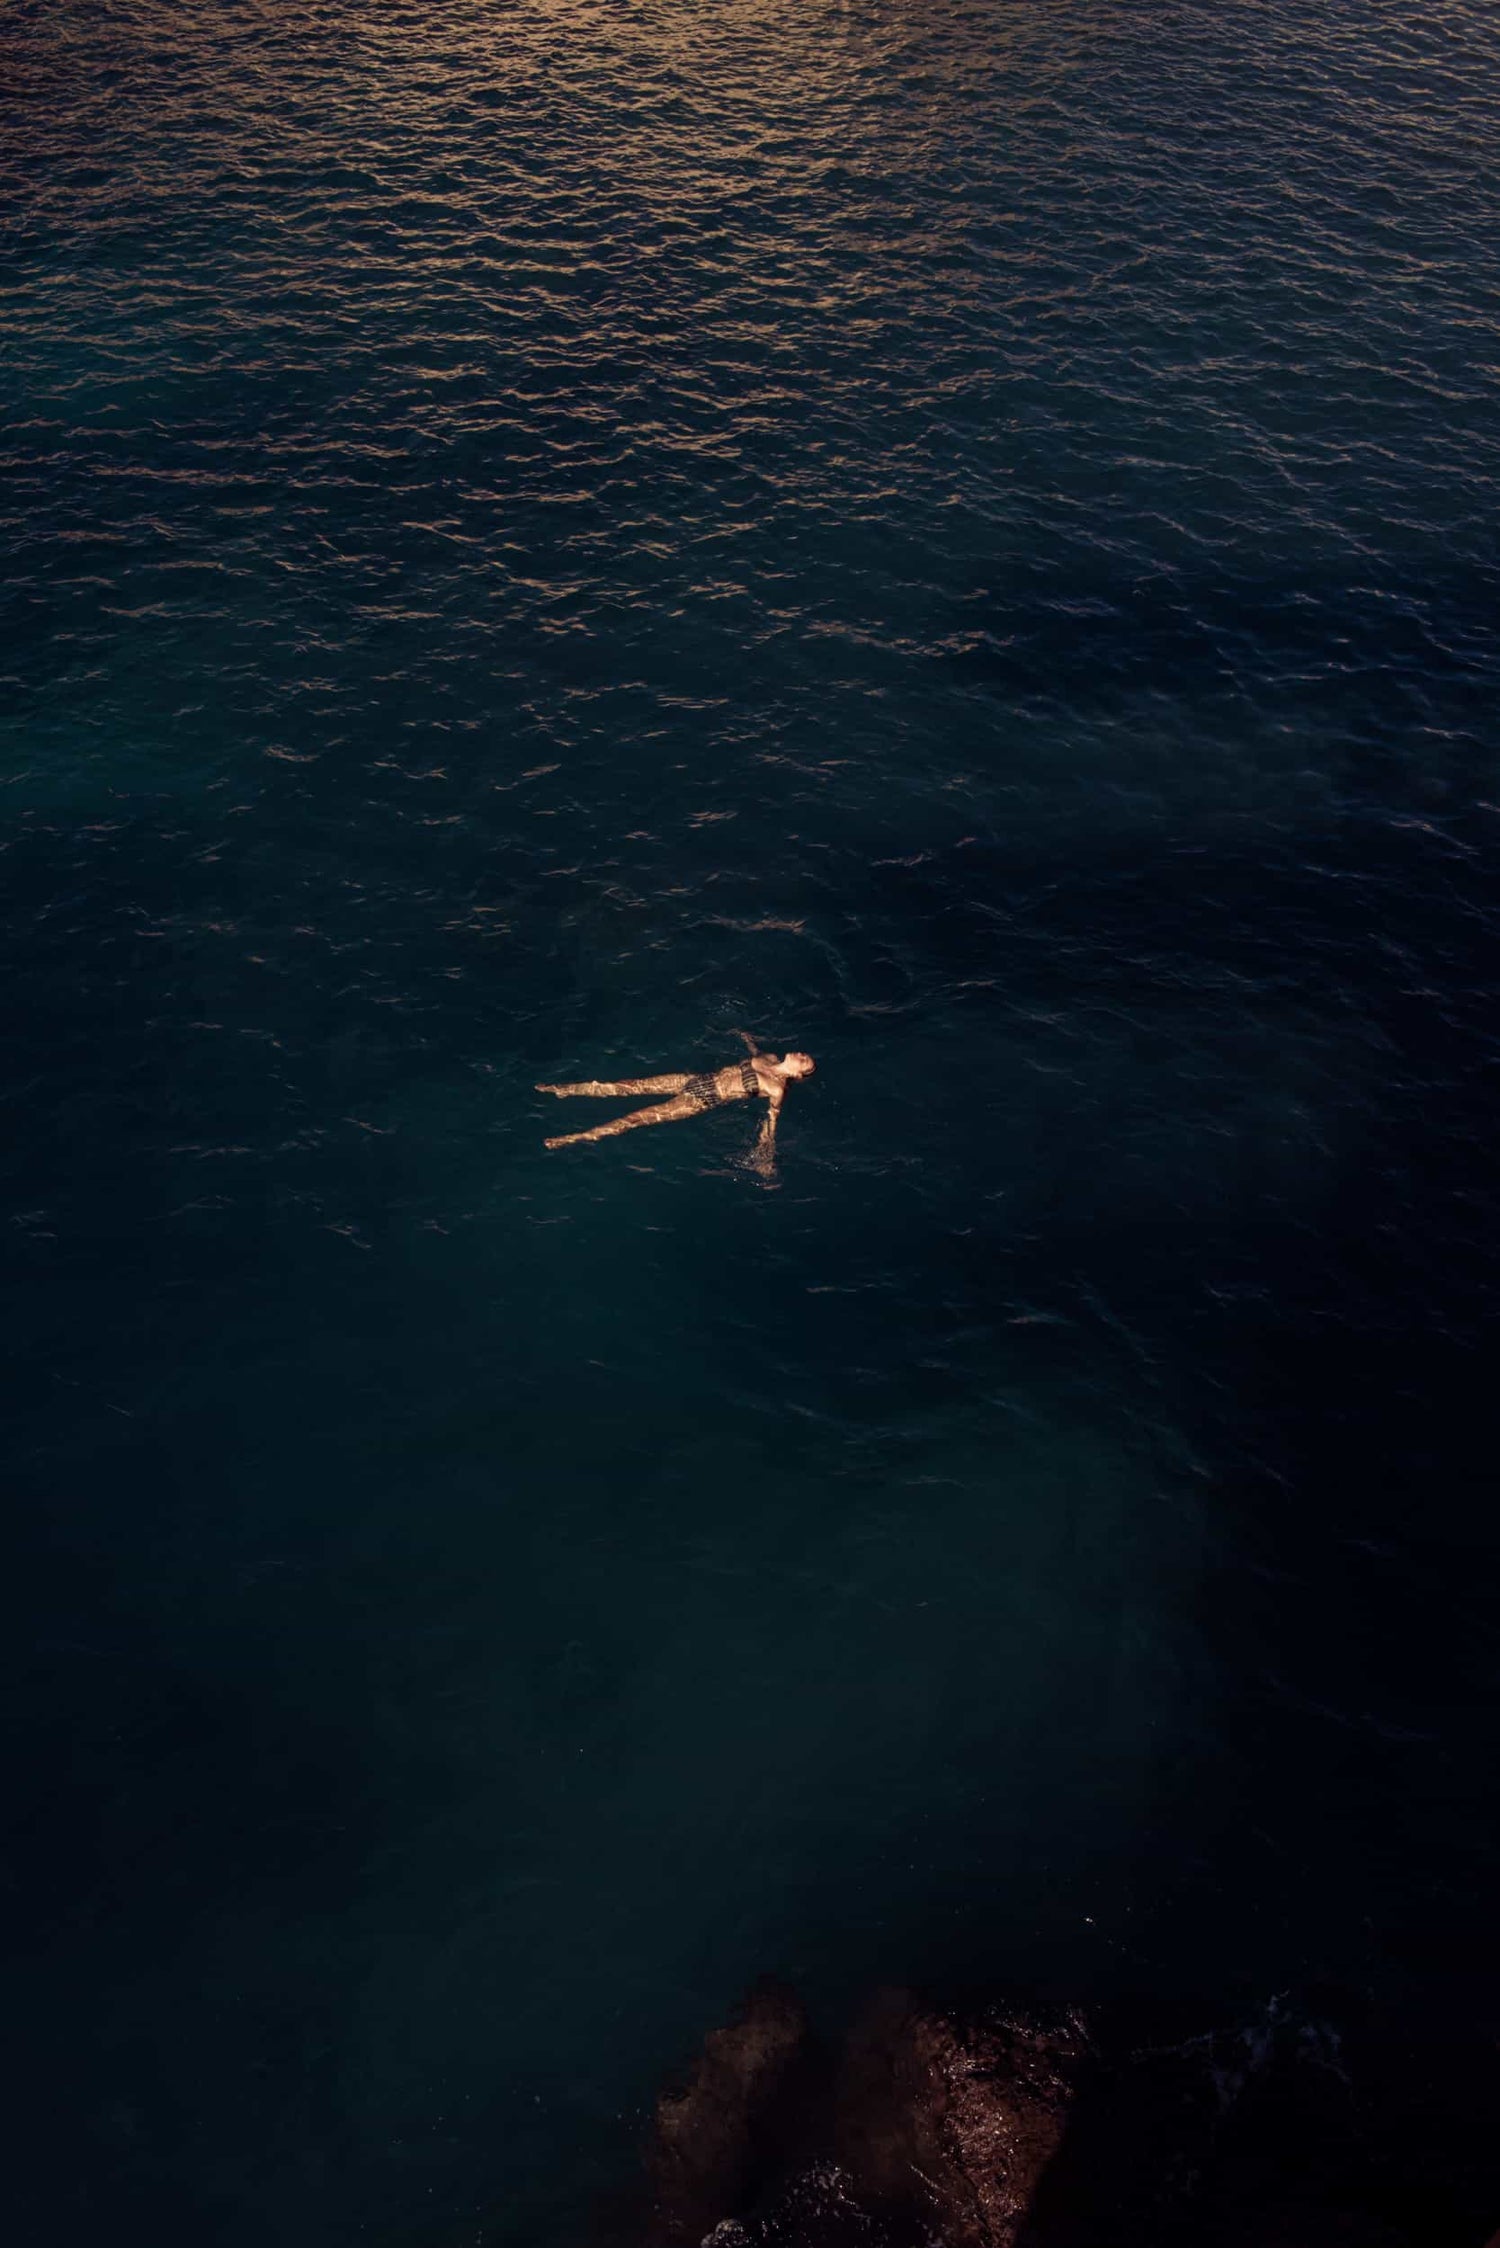 The artpiece 'Home Again' by Mathieu Puga is a black and white photograph which shows a person floating in a dark blue ocean, while the sunlight is reflecting on the waves in the background.